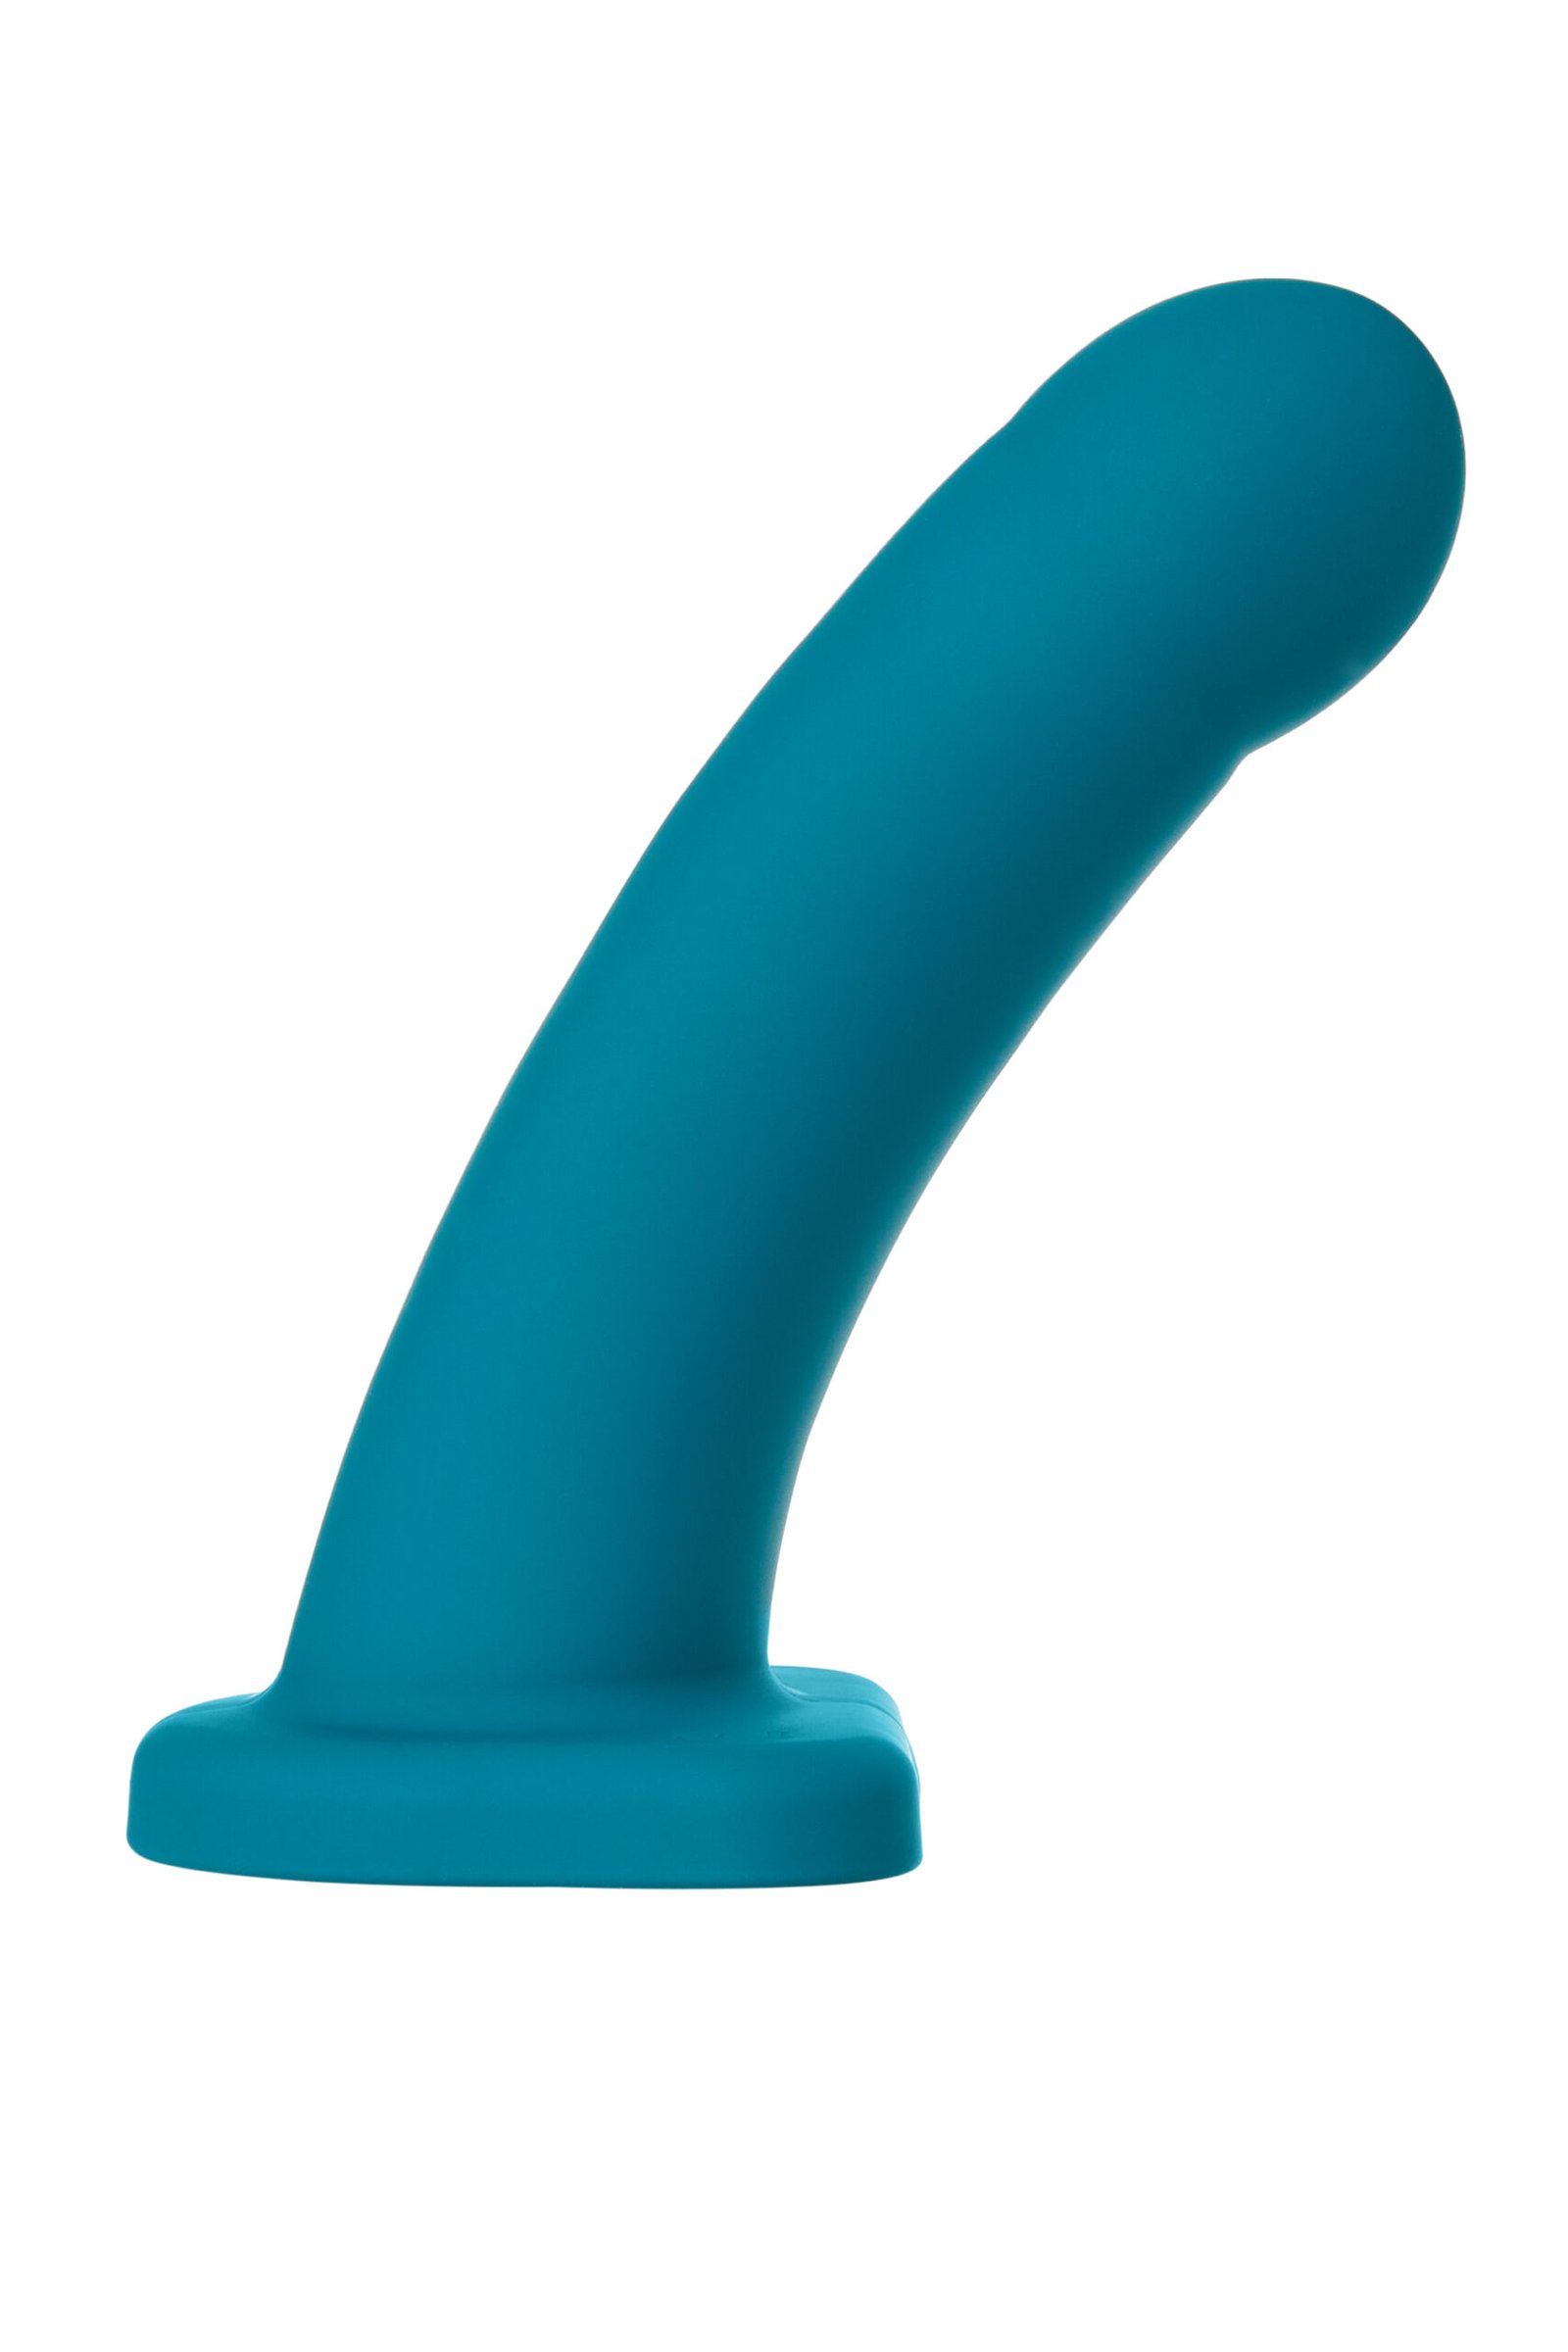 Sportsheets - Merge Collection - Holle dildo - 22,8 cm